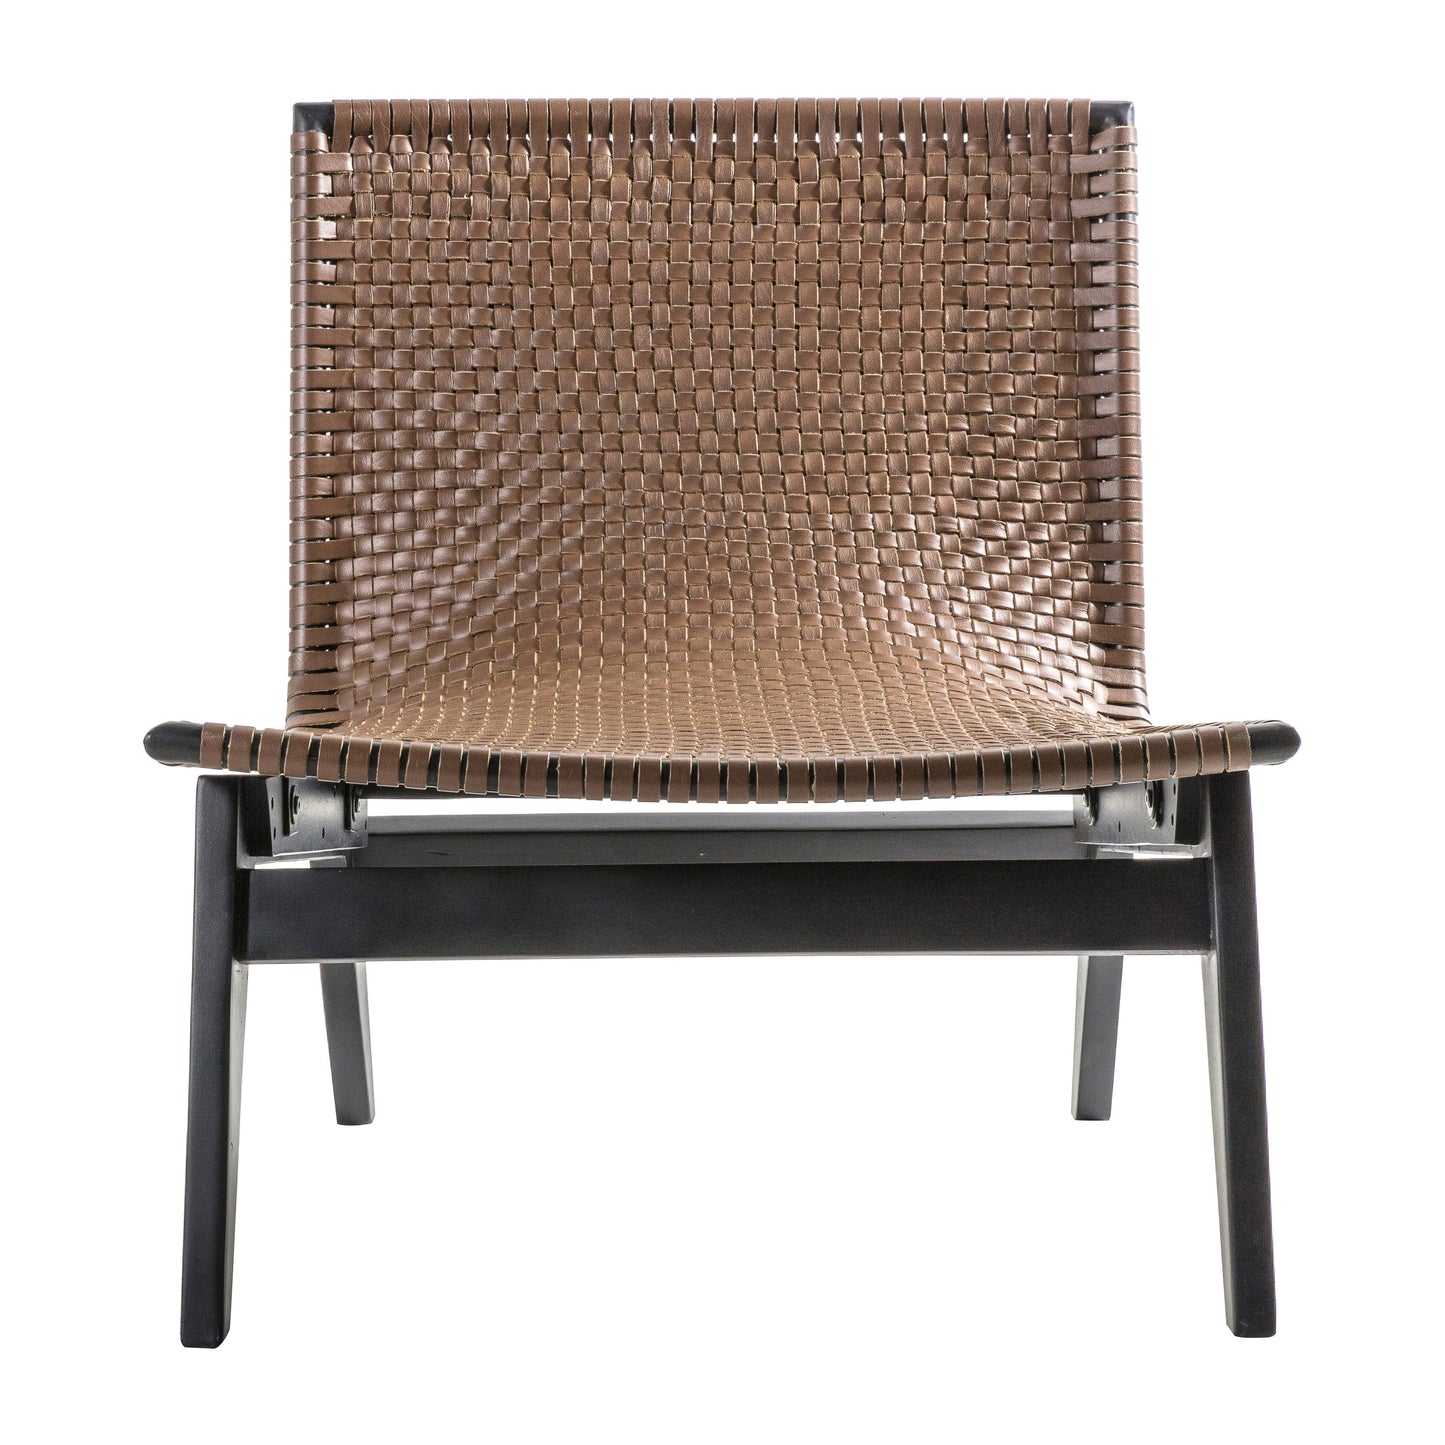 A Seville Lounge Chair Brown Leather by Kikiathome.co.uk for home interior decor.